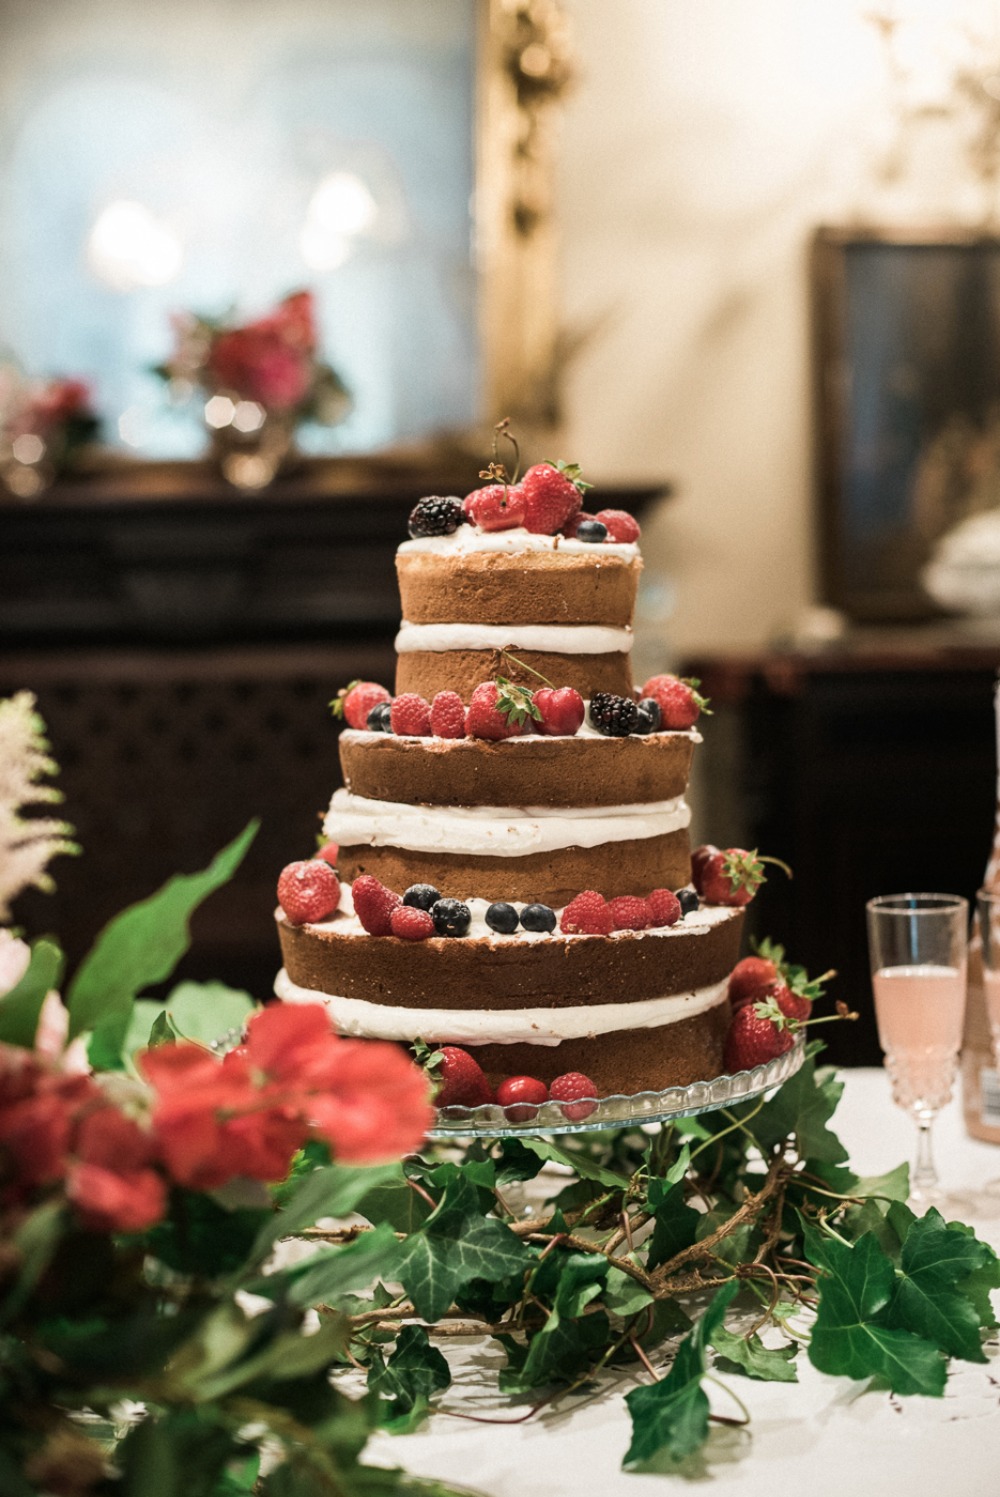 Naked cake with fruit topping